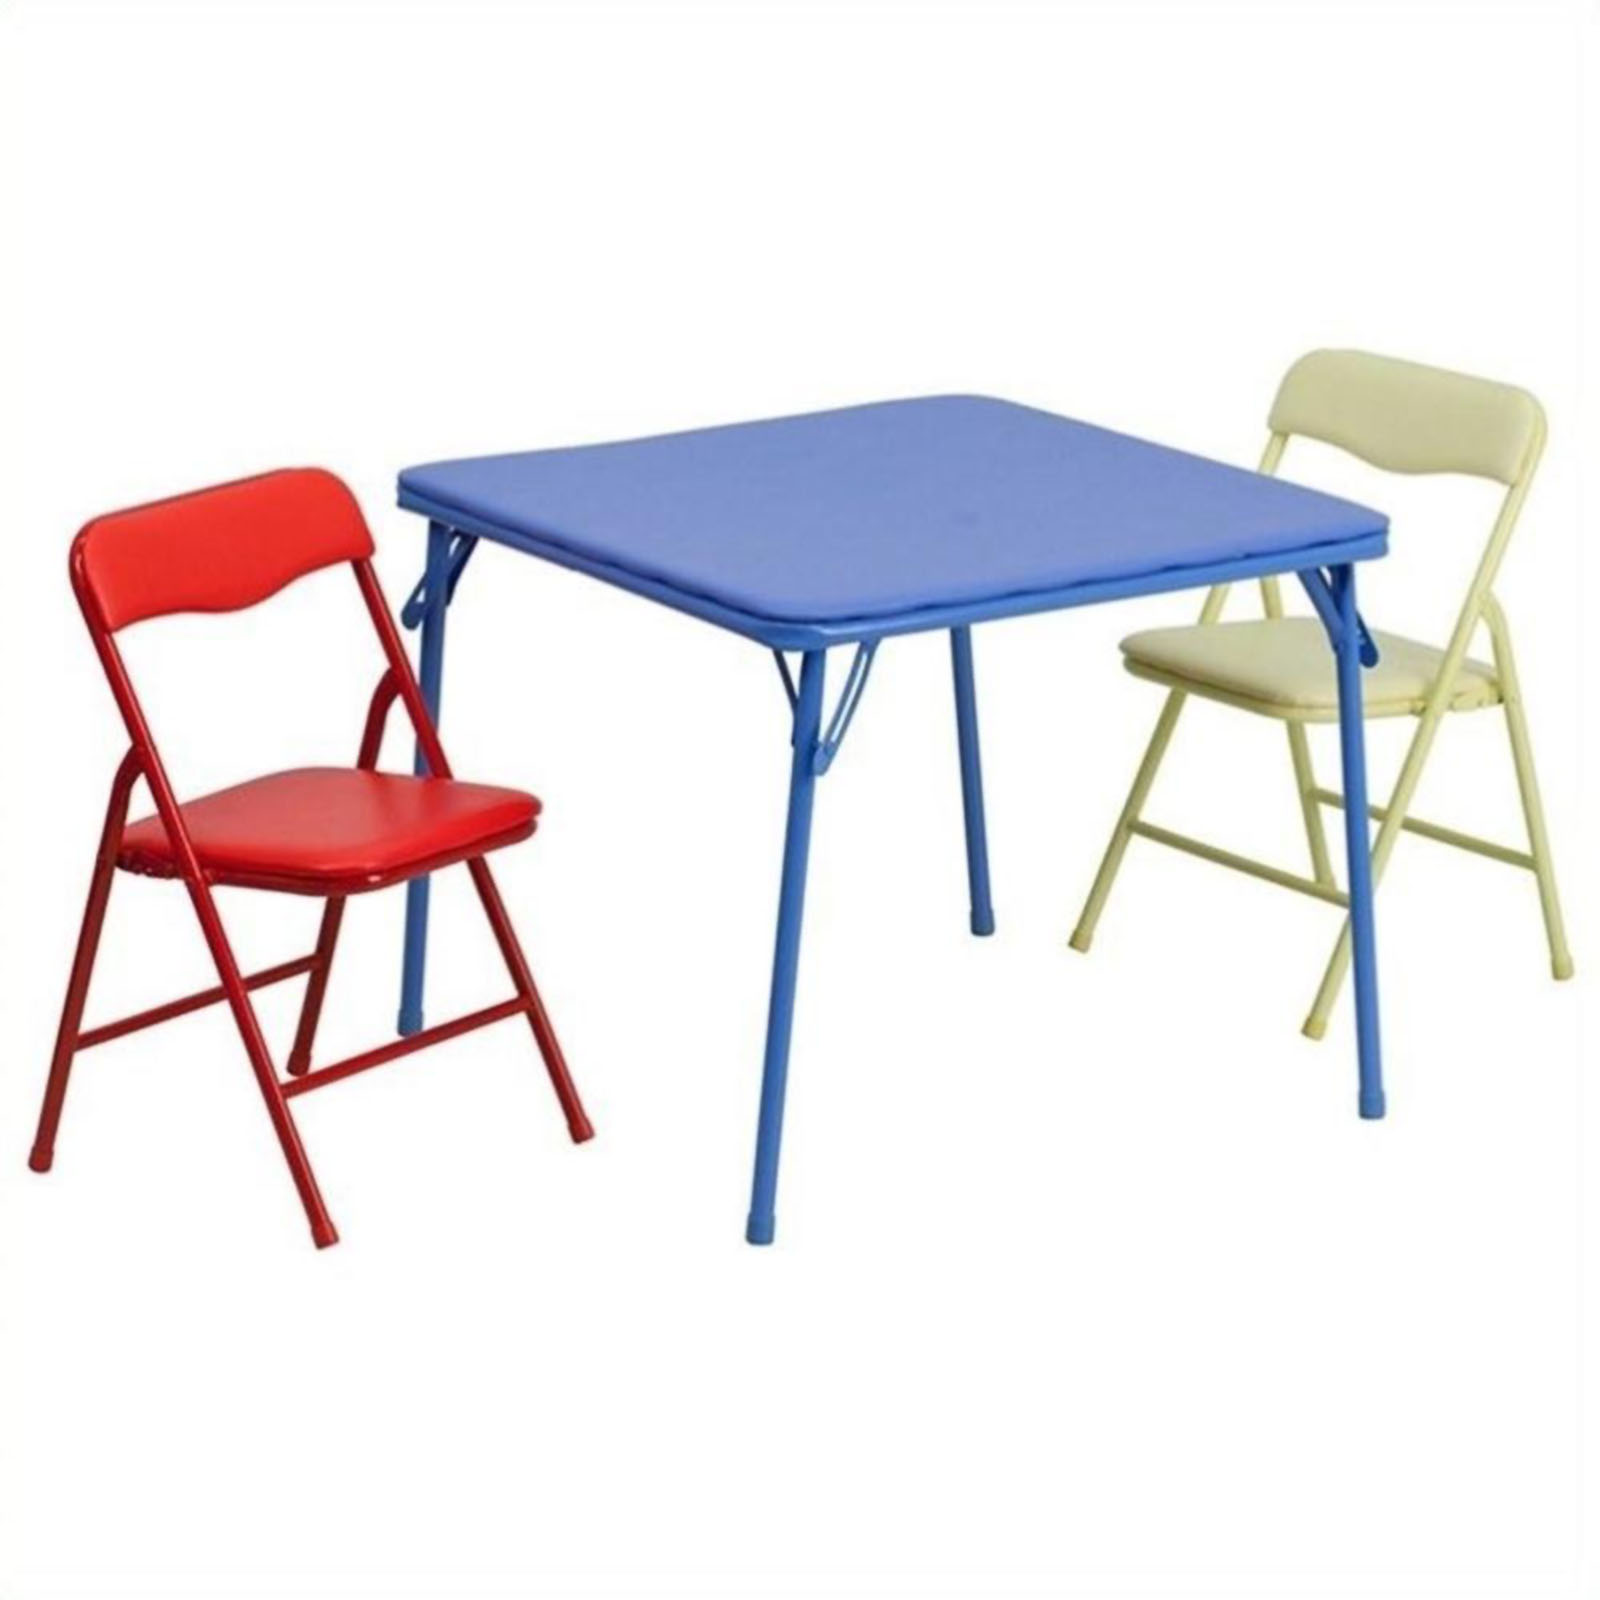 Lancaster Home 3pc. Kids Folding Table and Chair Set